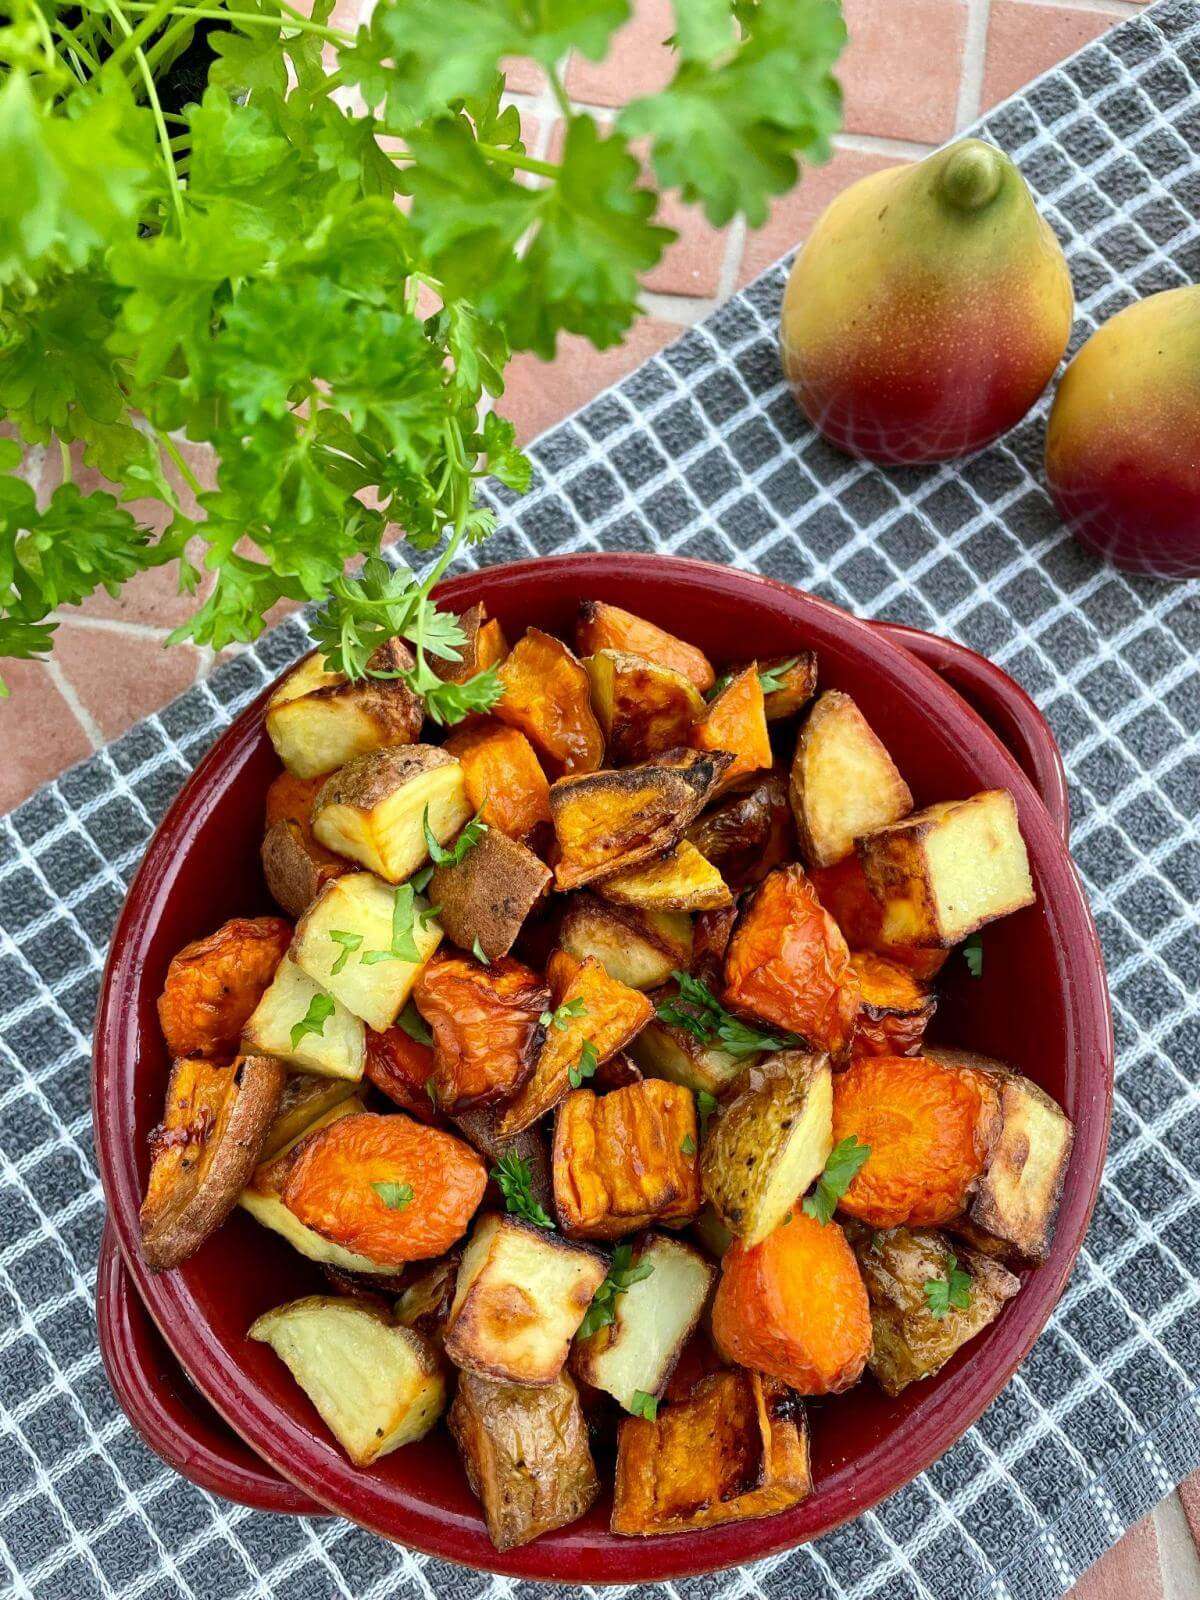 Roast vegetables in red dish with parsley.